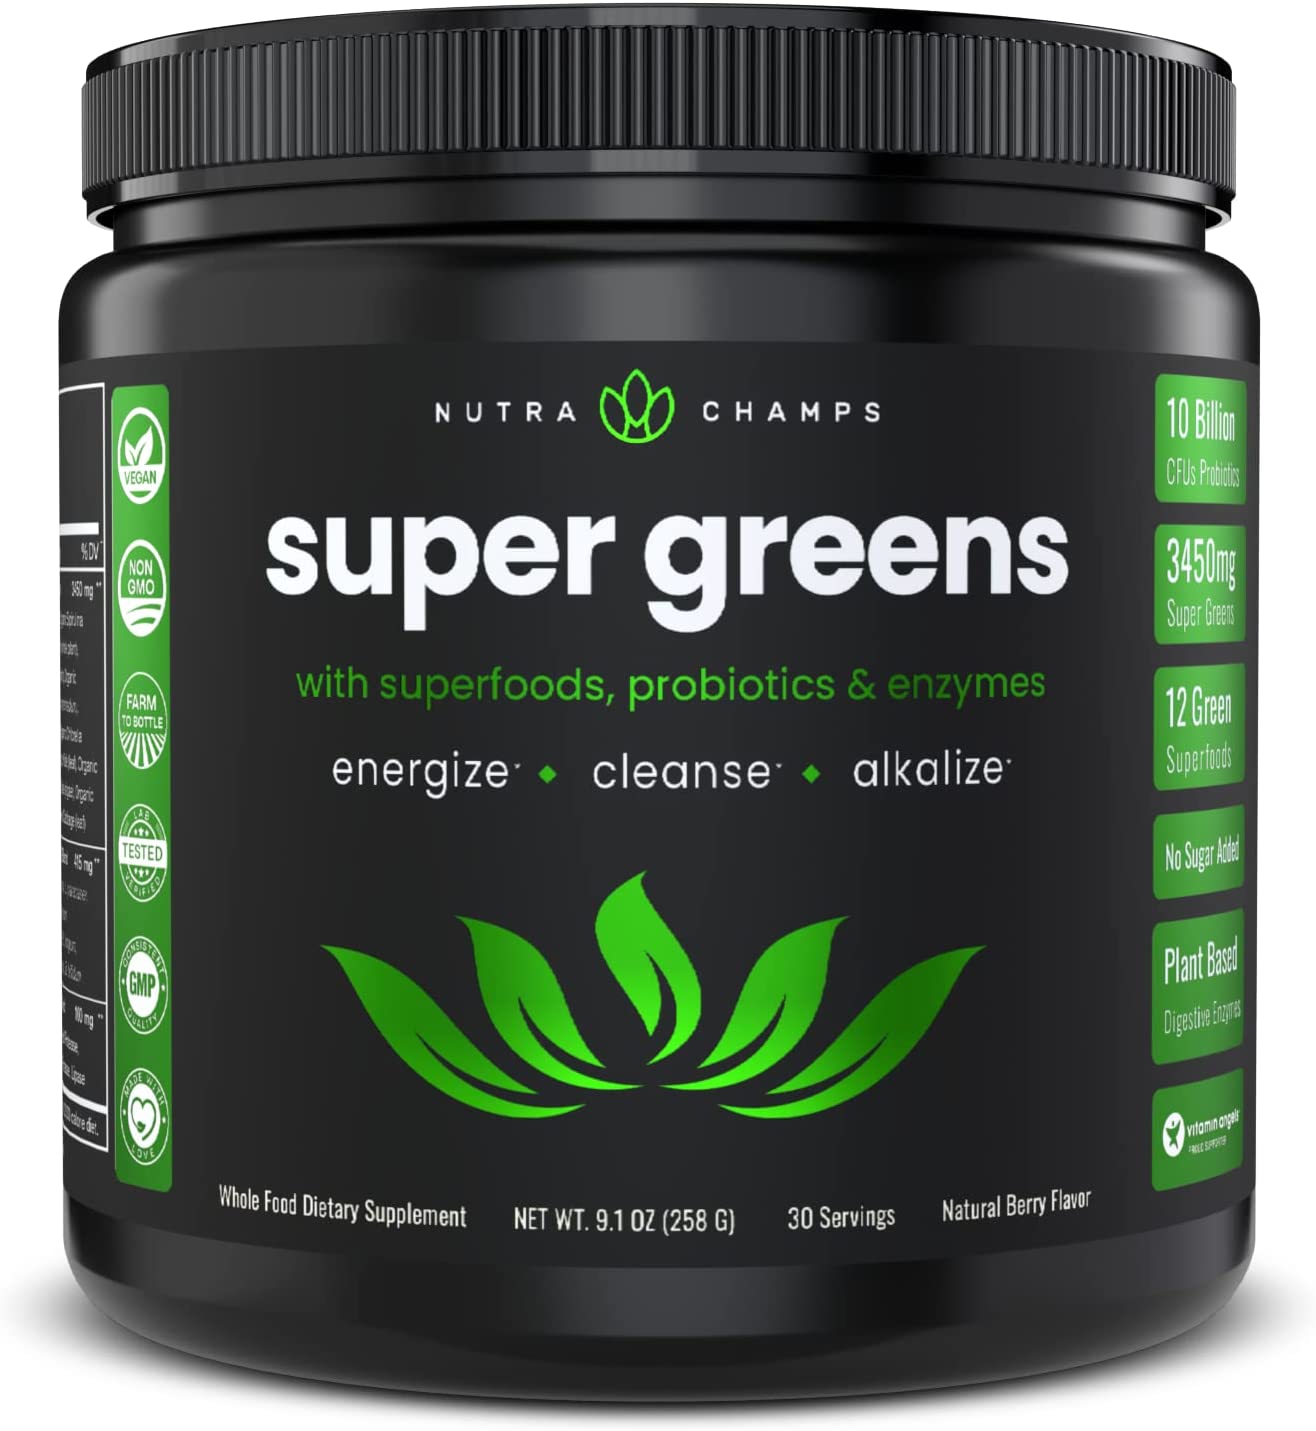 NutraChamps Super Greens Natural Powder Superfood